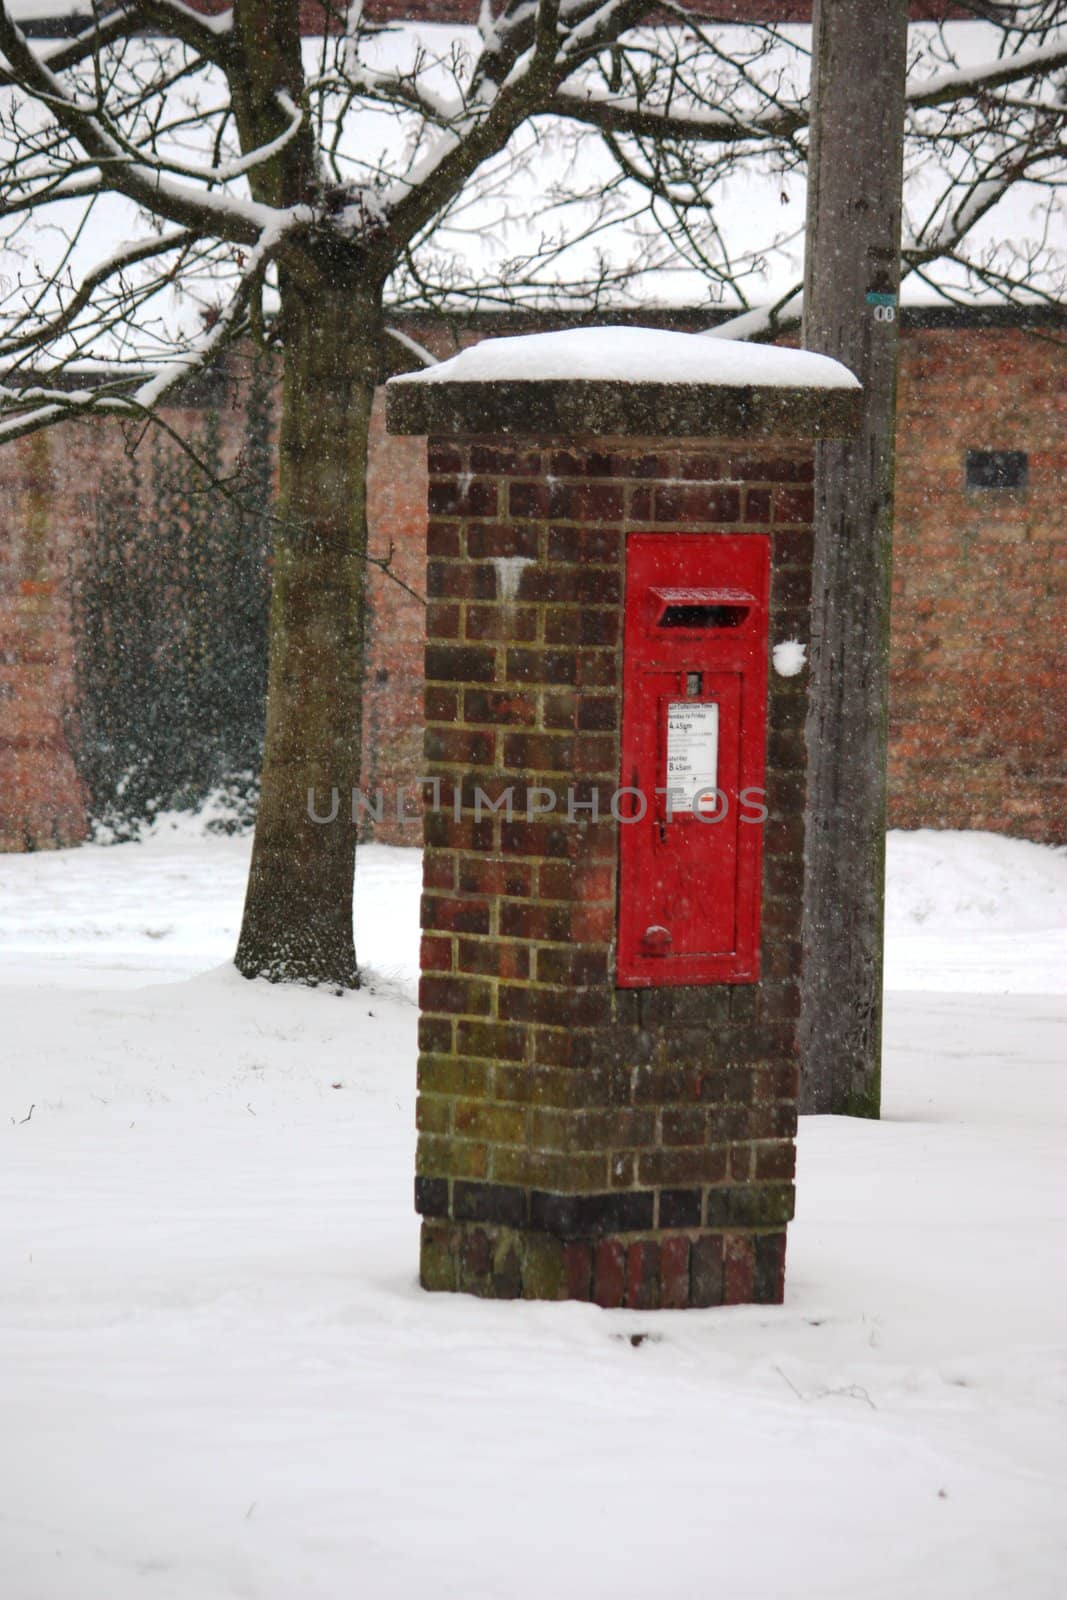 A snow covered Post box